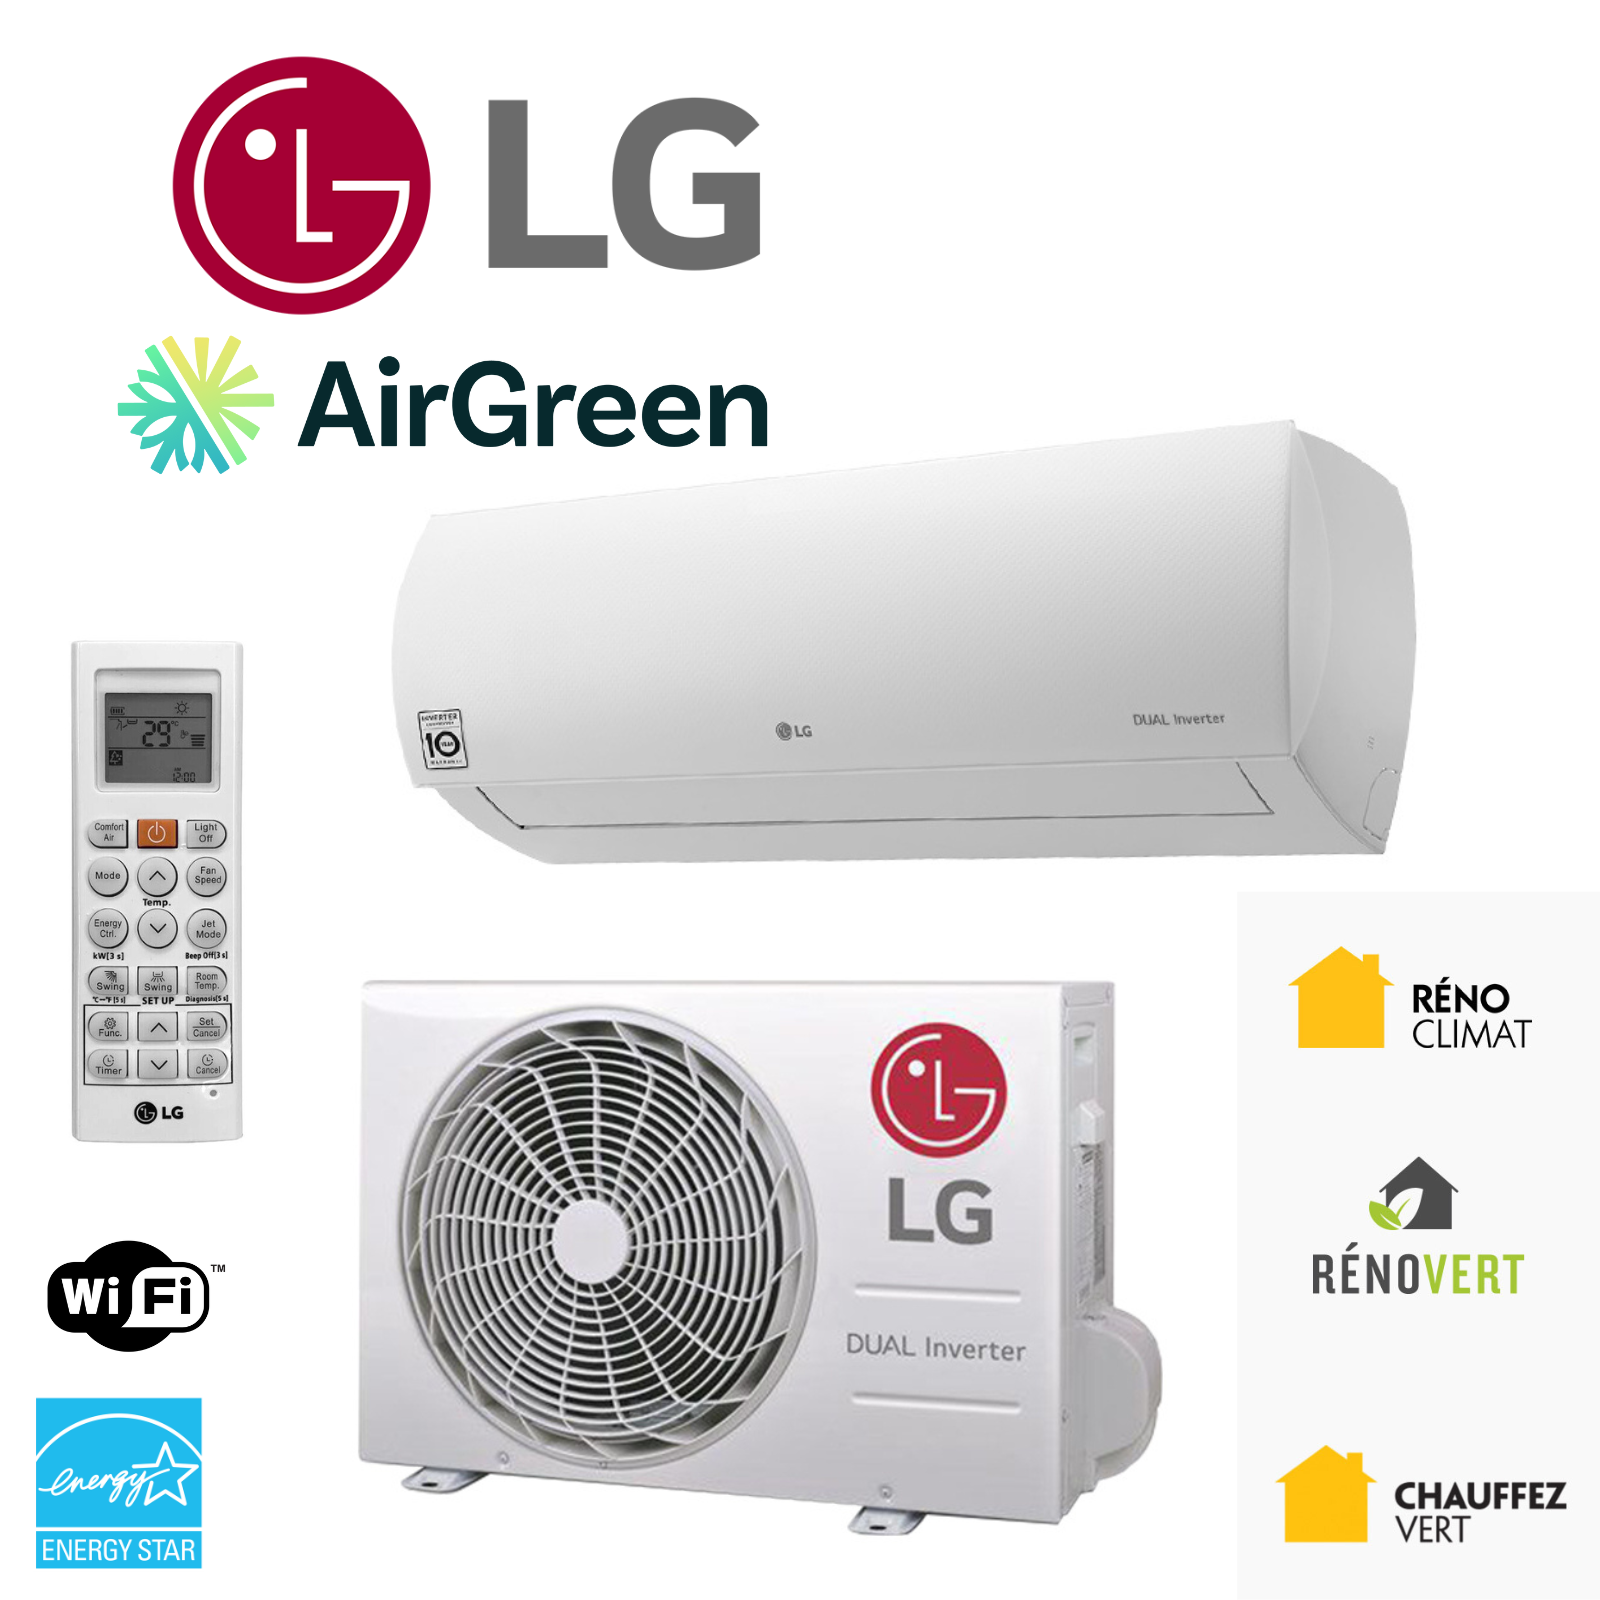 Thermopompe murale LG | MONTREAL, LAVAL, LONGUEUIL, RIVE SUD, RIVE NORD